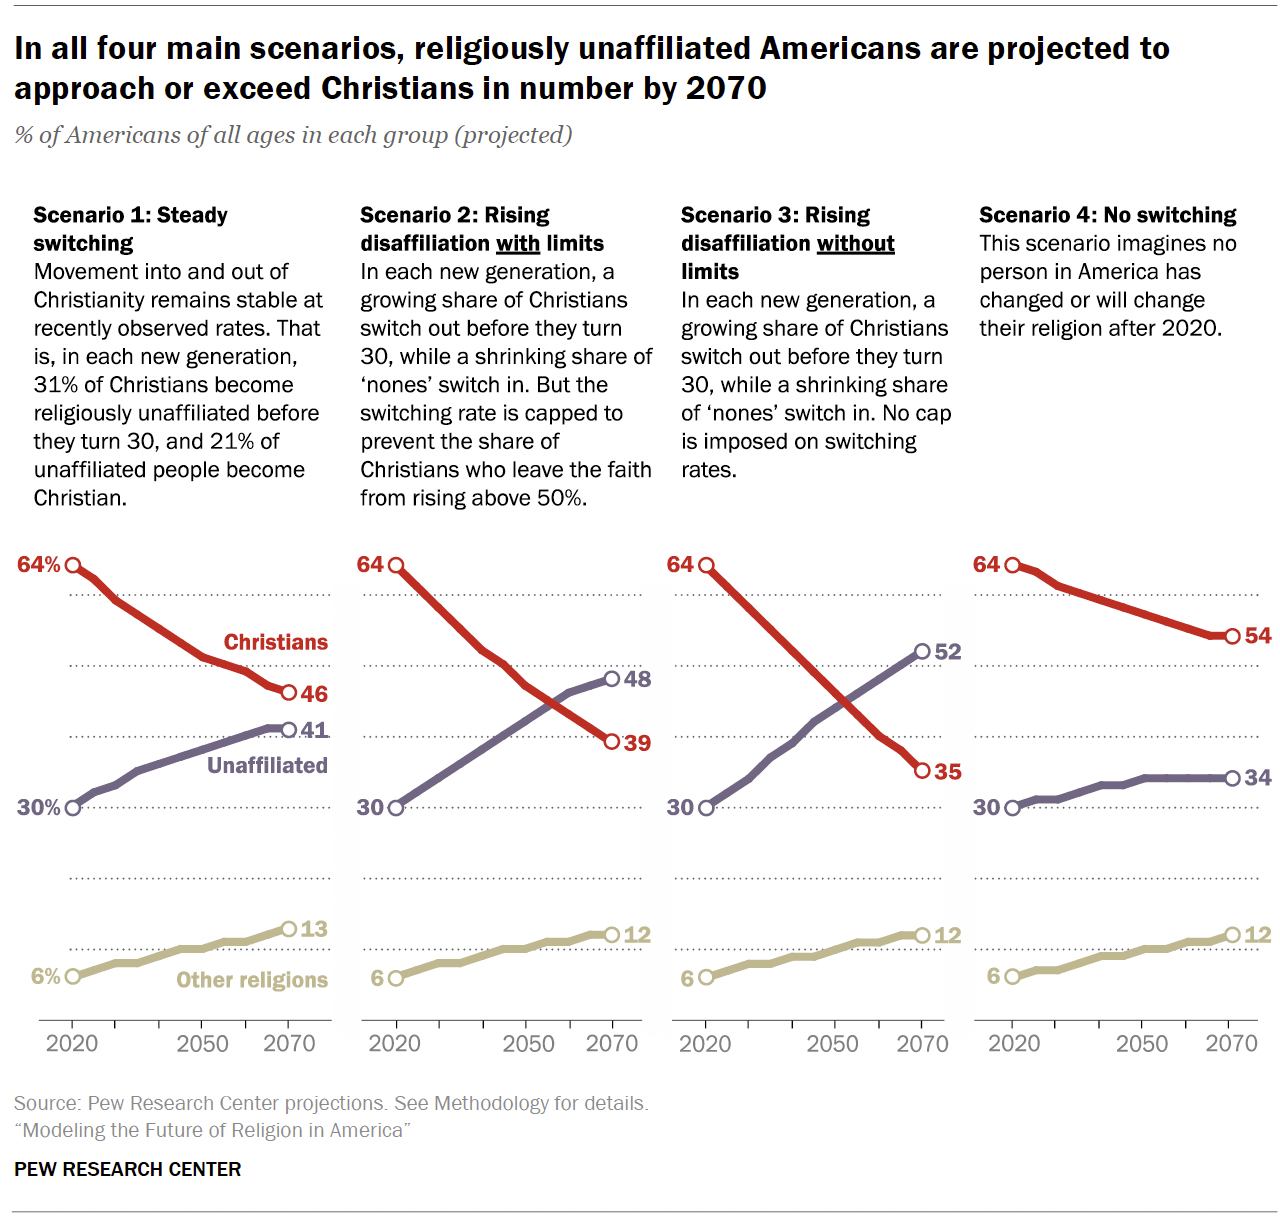 Religious projections over the next 50 years in the US by the Pew Research Center found that under several scenarios, people who identify as religiously unaffiliated are expected to grow